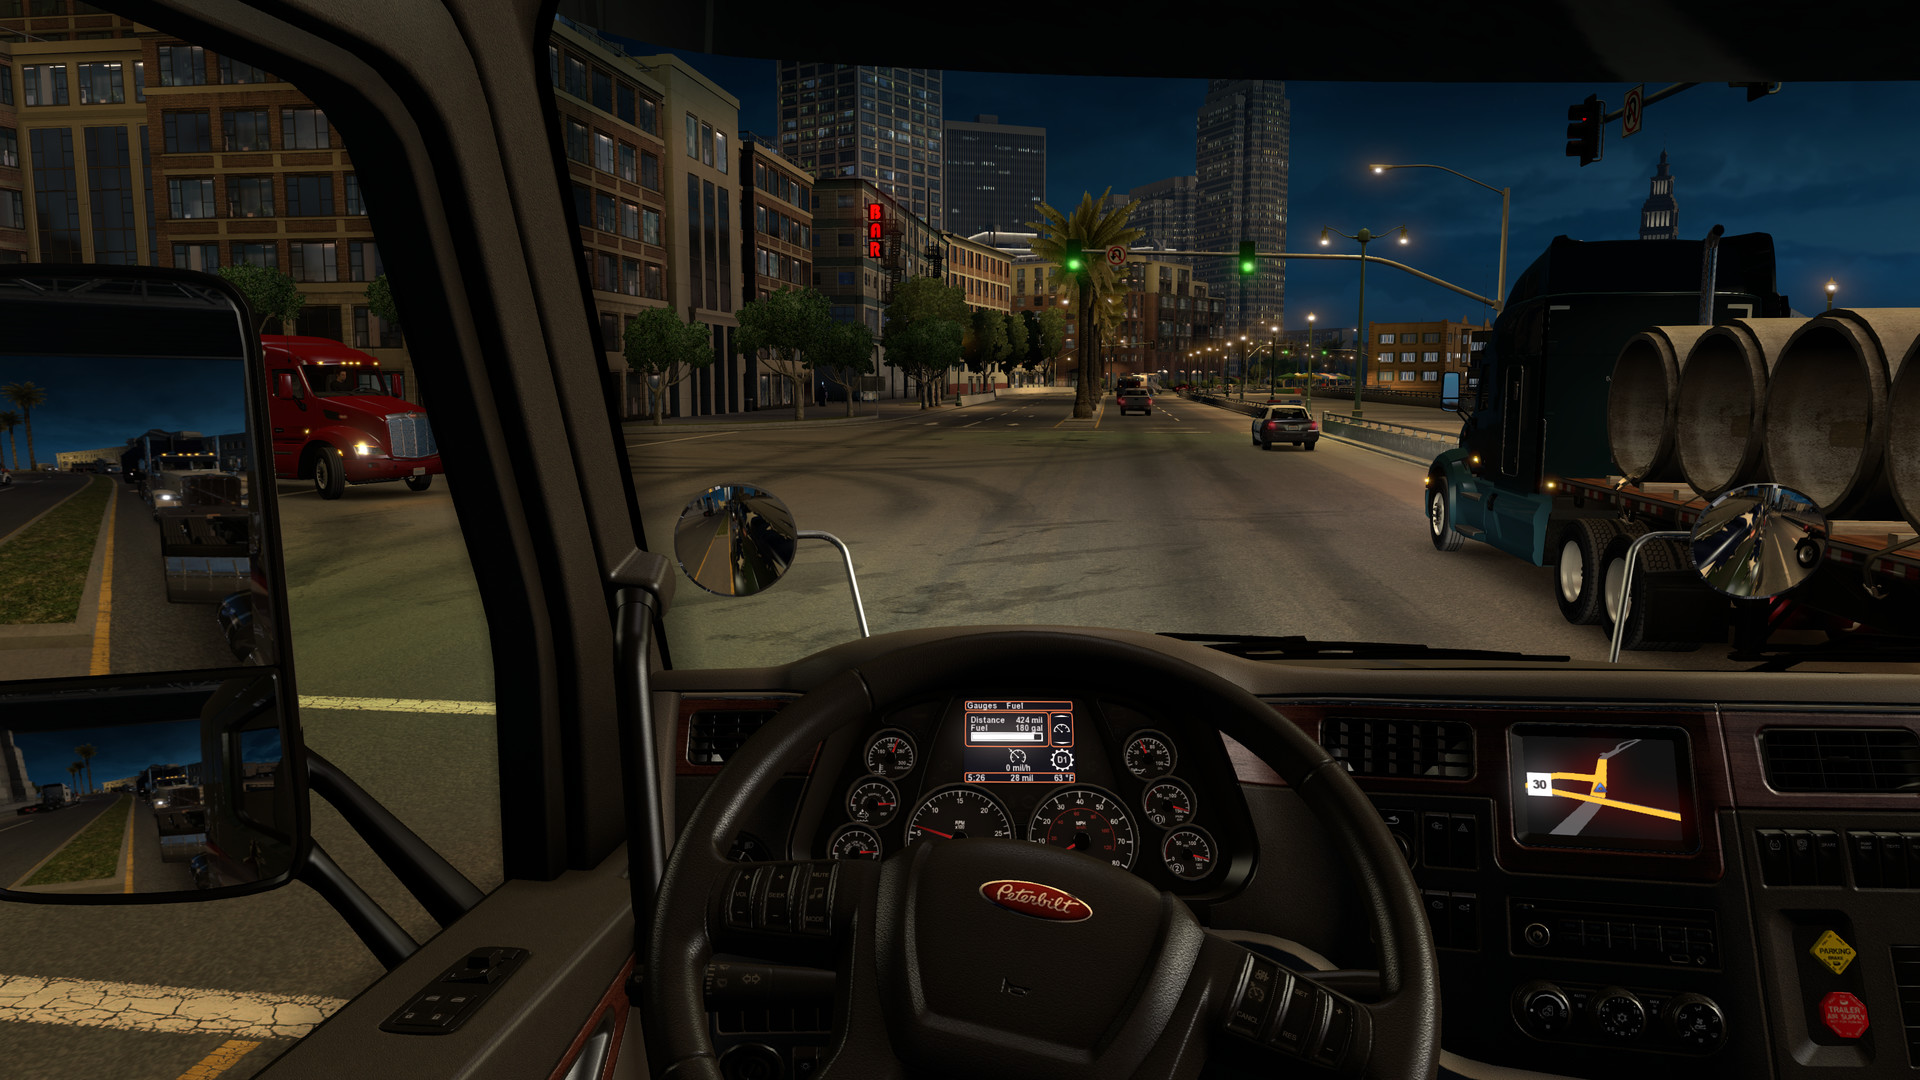 how big is the american truck simulator download